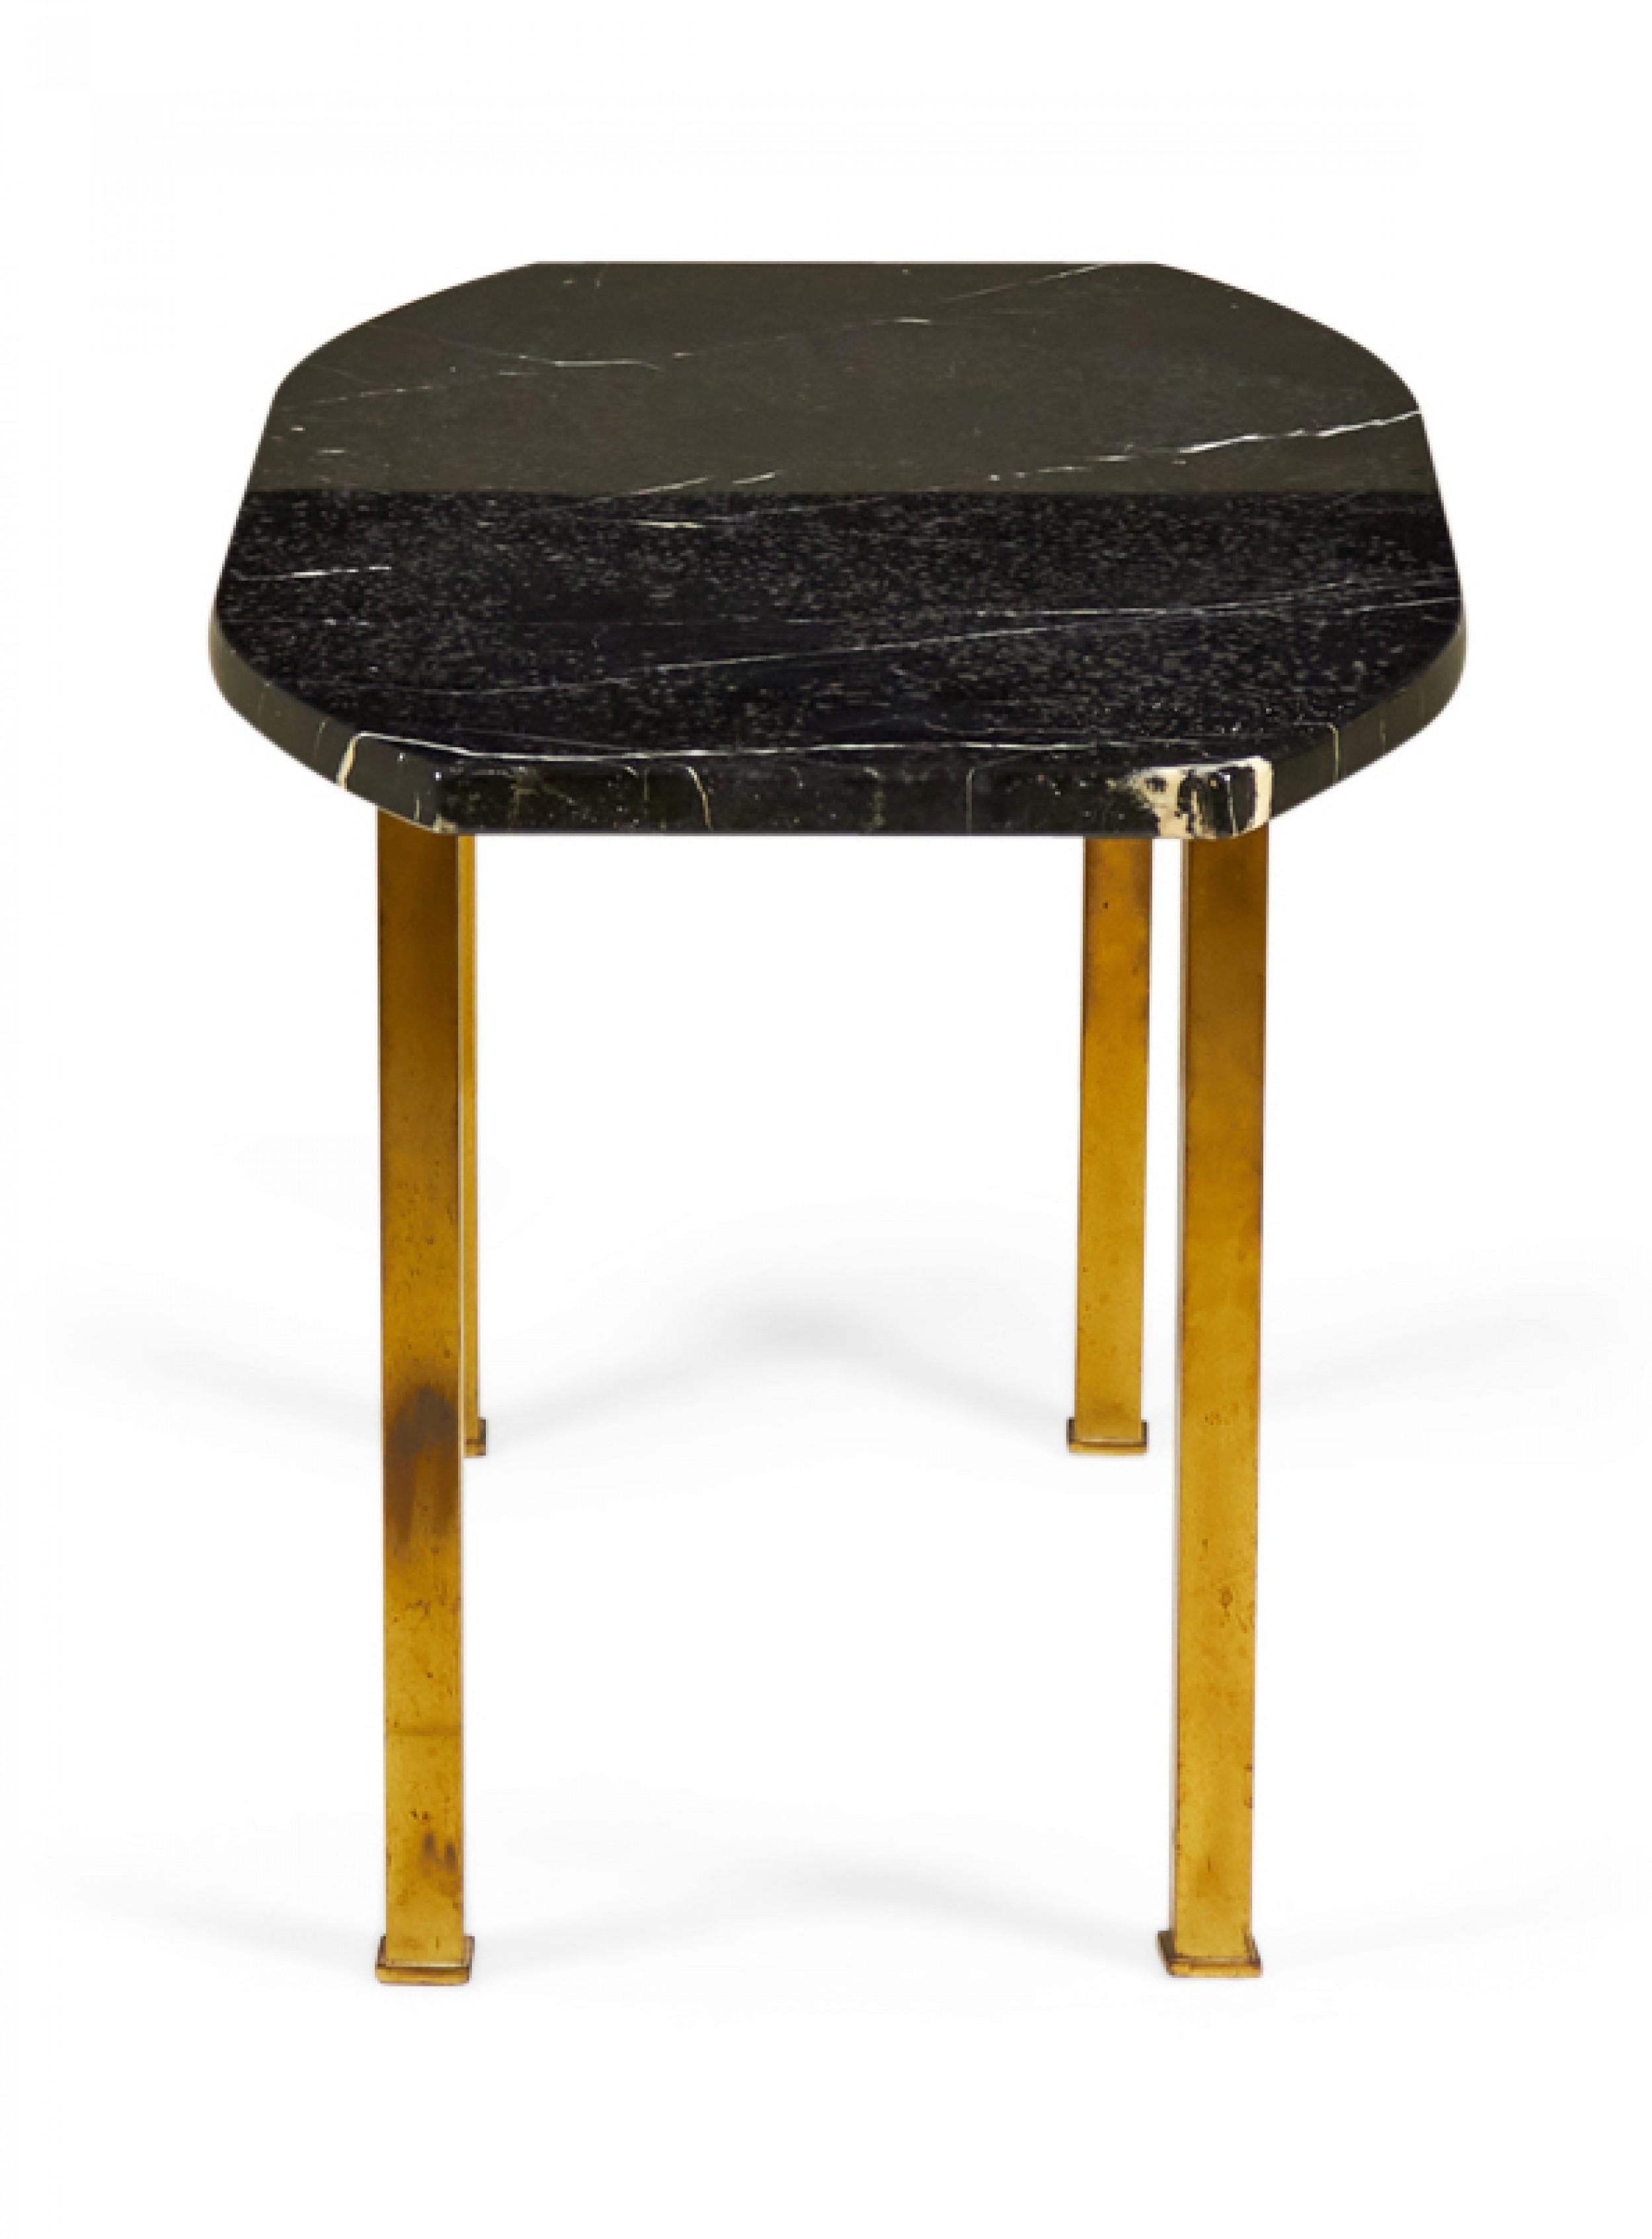 American Mid-Century coffee / cocktail table with an oval-shaped black marble top with canted ends resting on four square brass legs. (HARVEY PROBBER)
